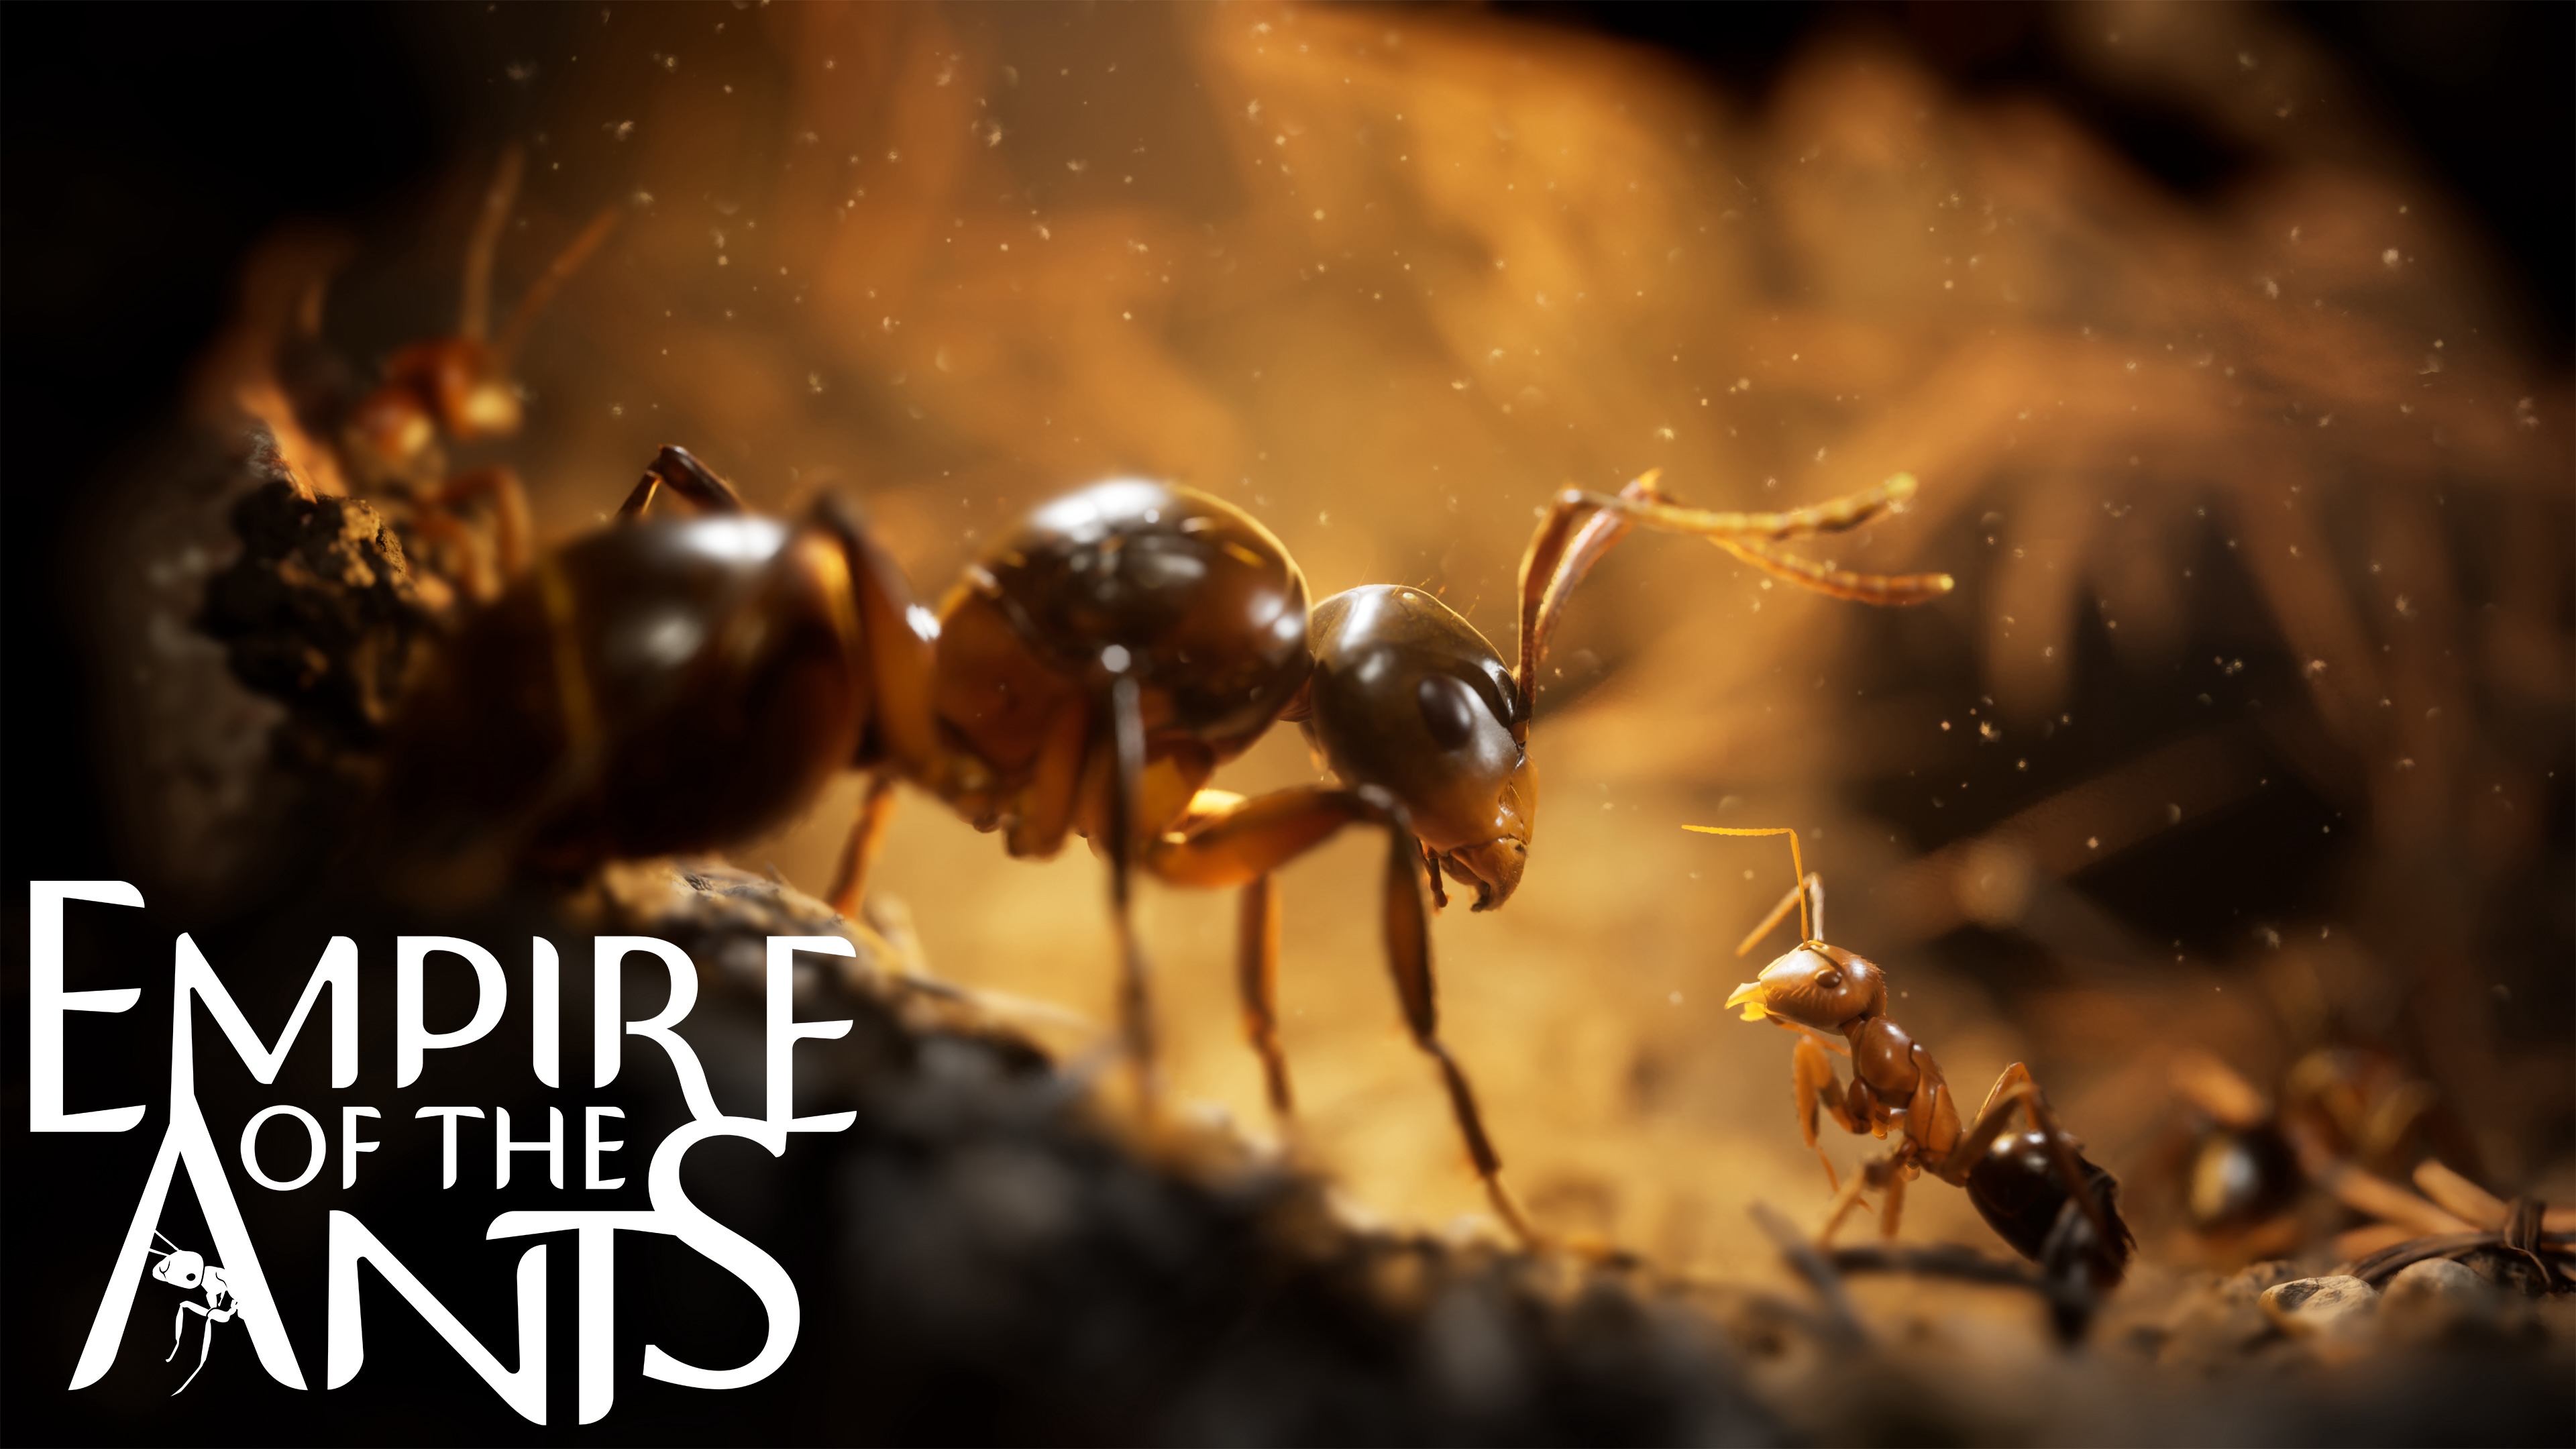 Release date for the visually stunning Empire of the Ants revealed – coming to Xbox, PlayStation and PC